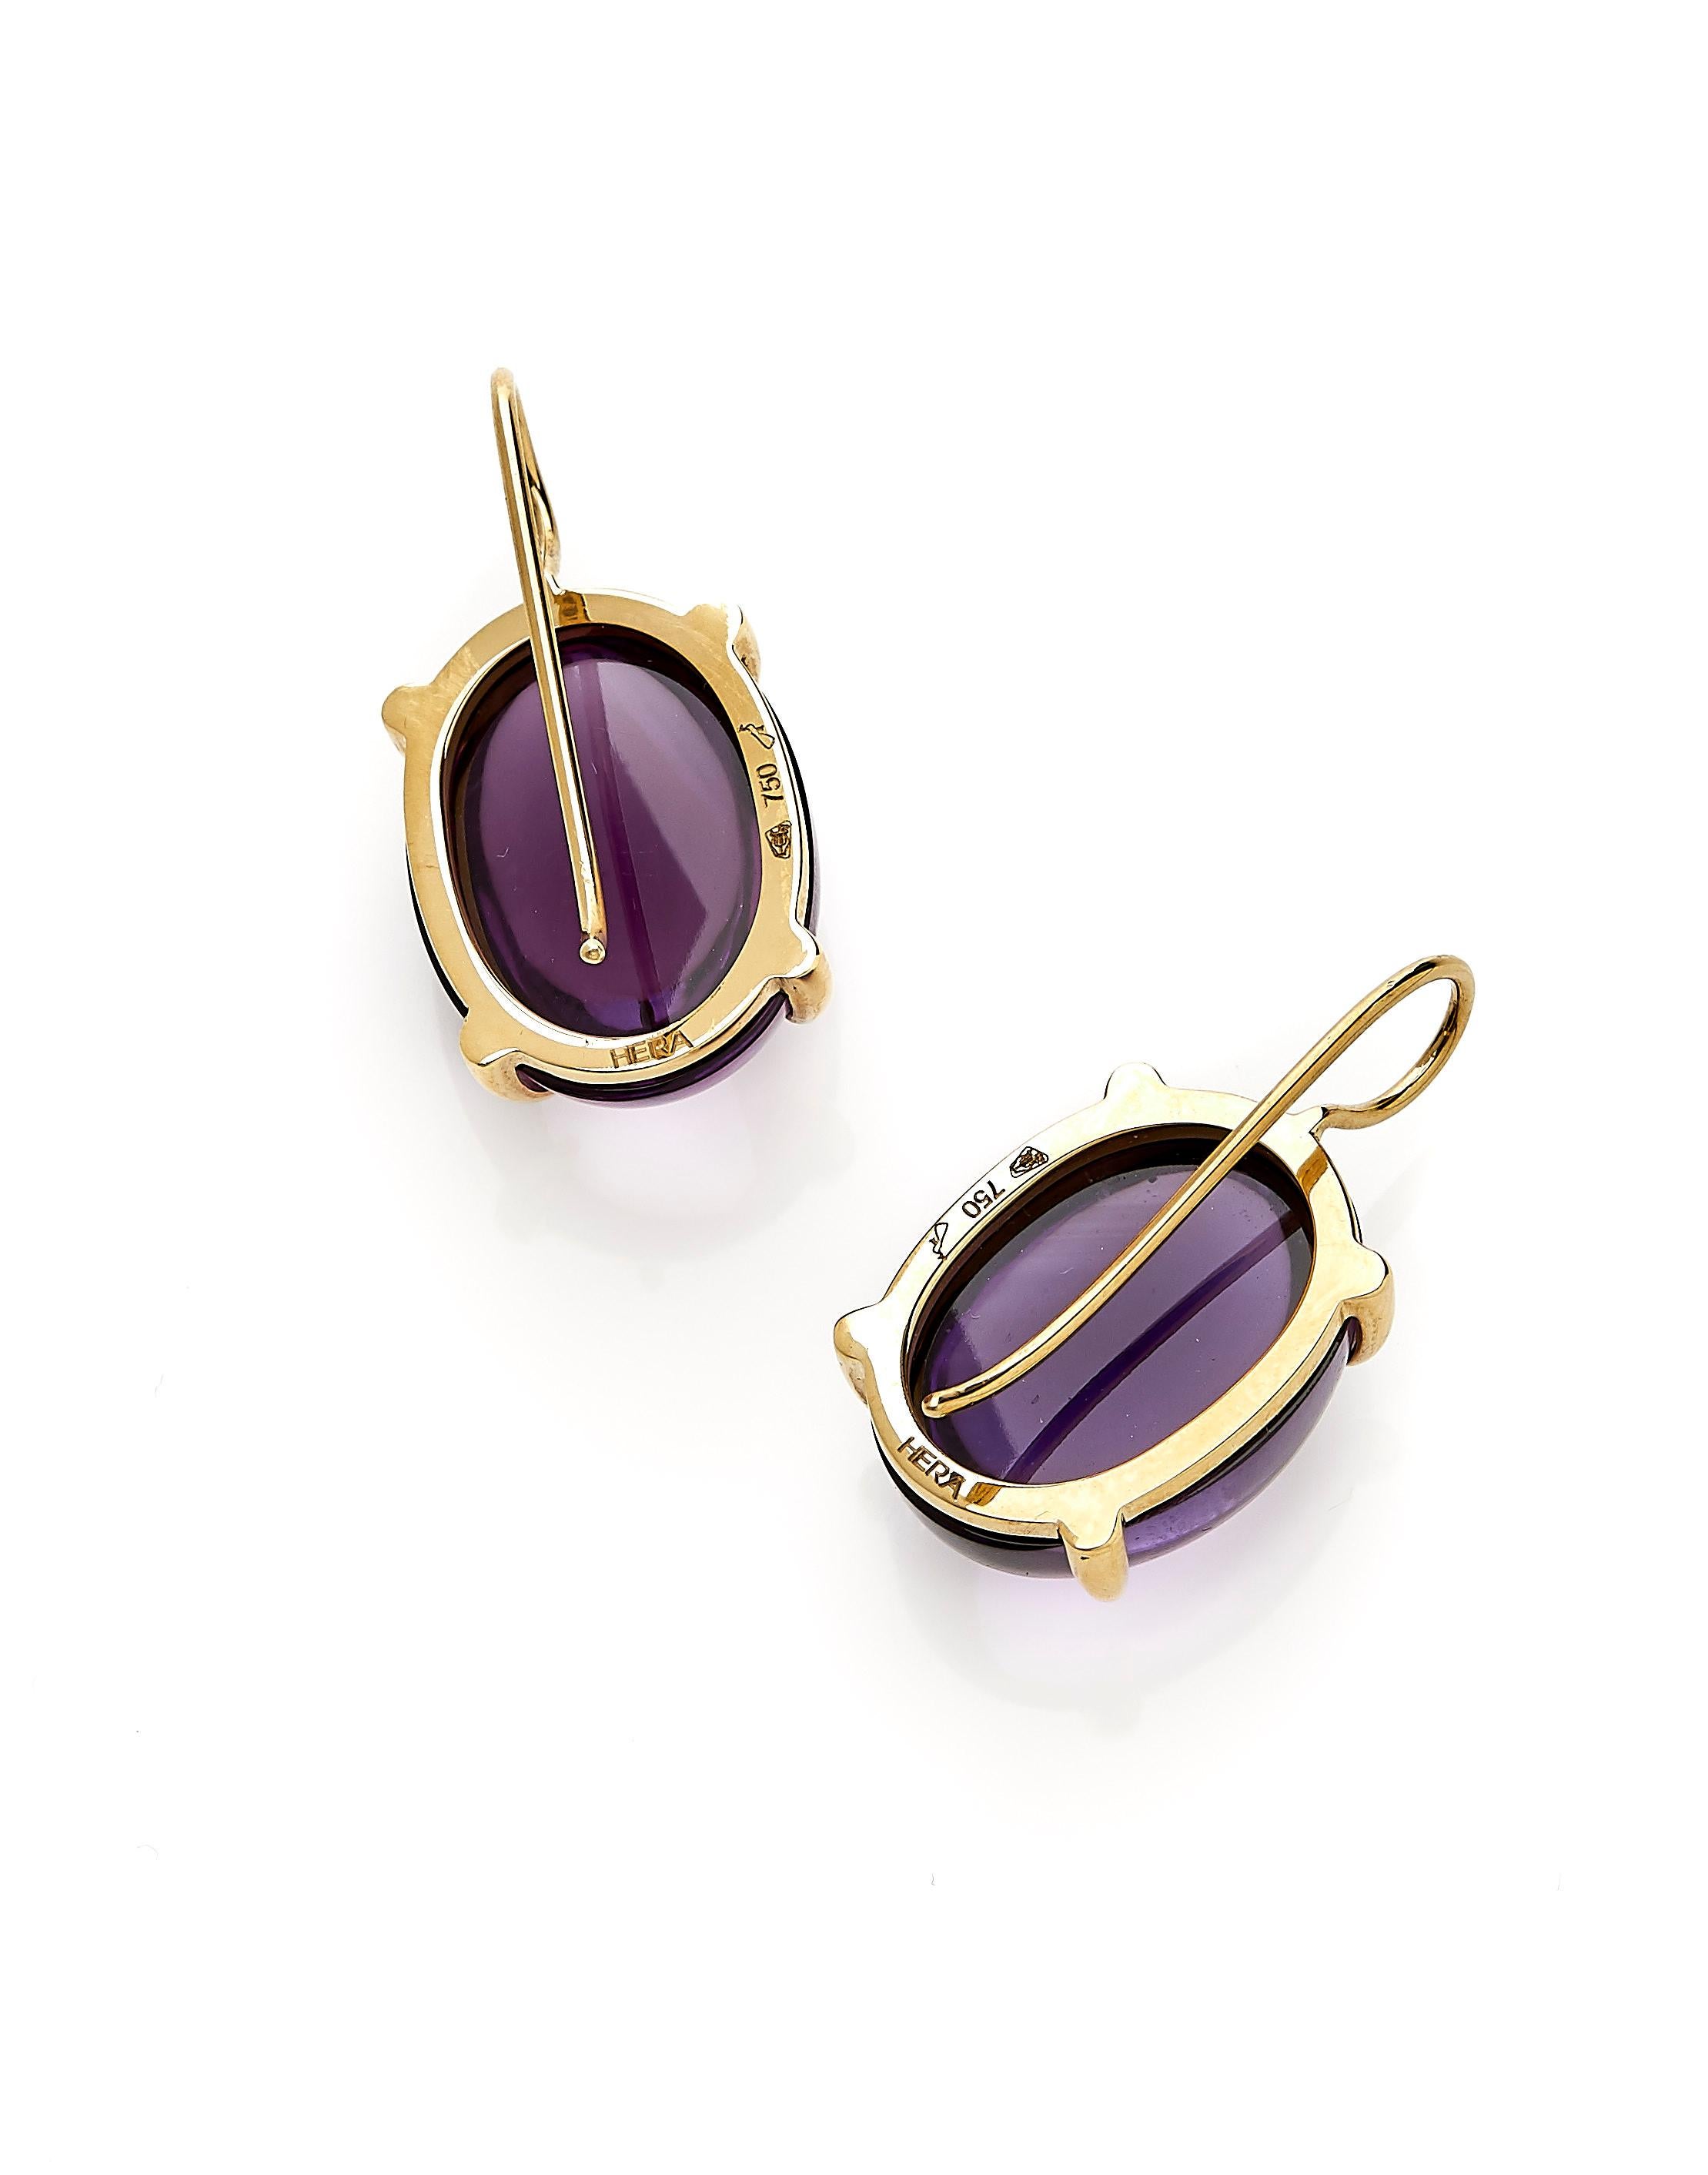 Contemporary 18 Karat Yellow Gold Drop Earrings with 37.5 Carat Cabochon Brazilian Amethysts For Sale